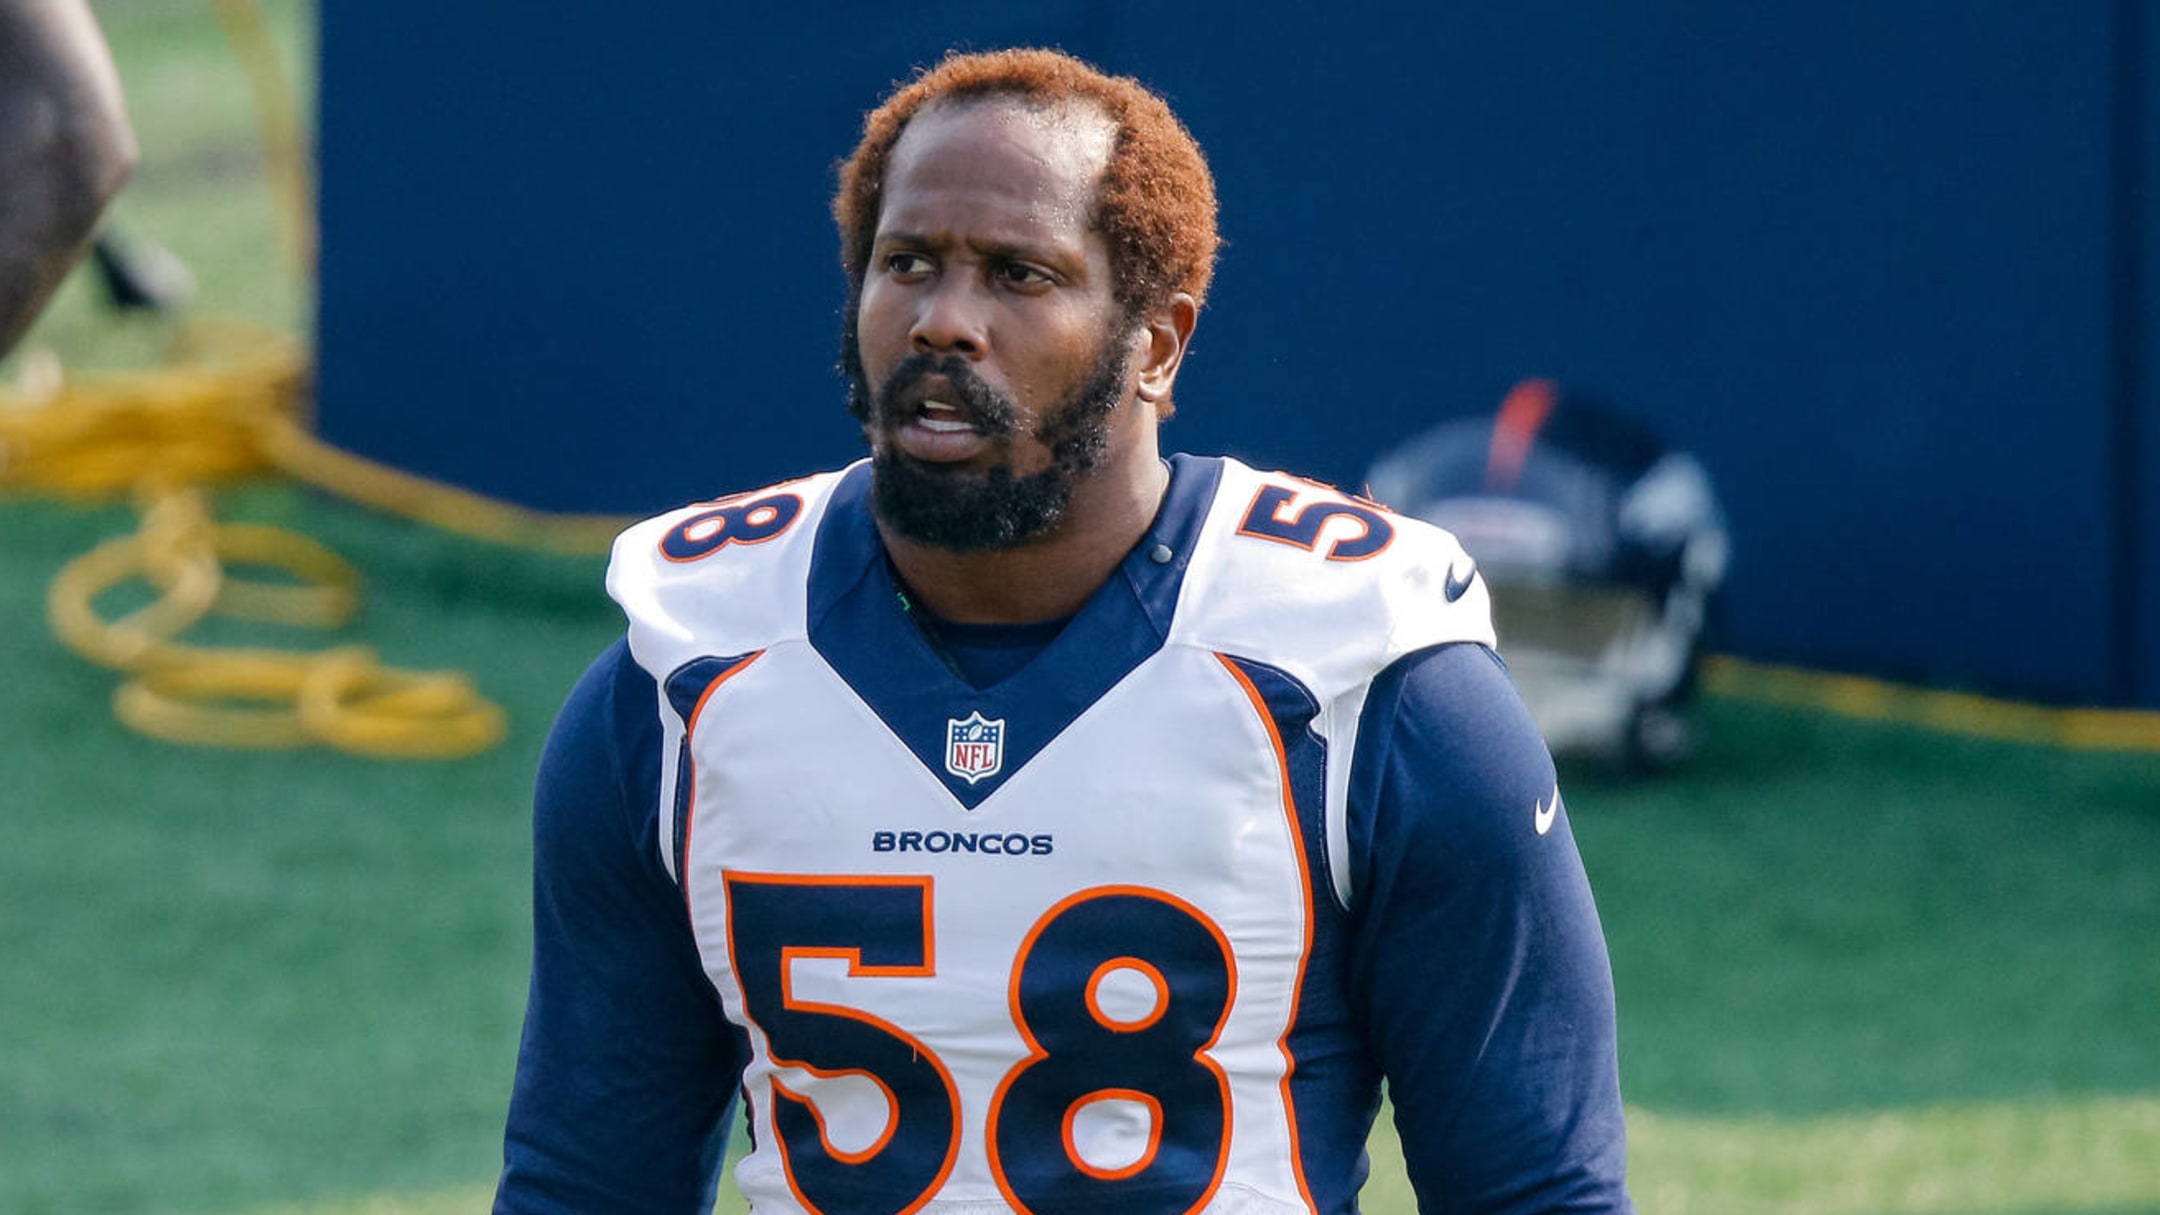 Von Miller not expected to return to Broncos in 2021?